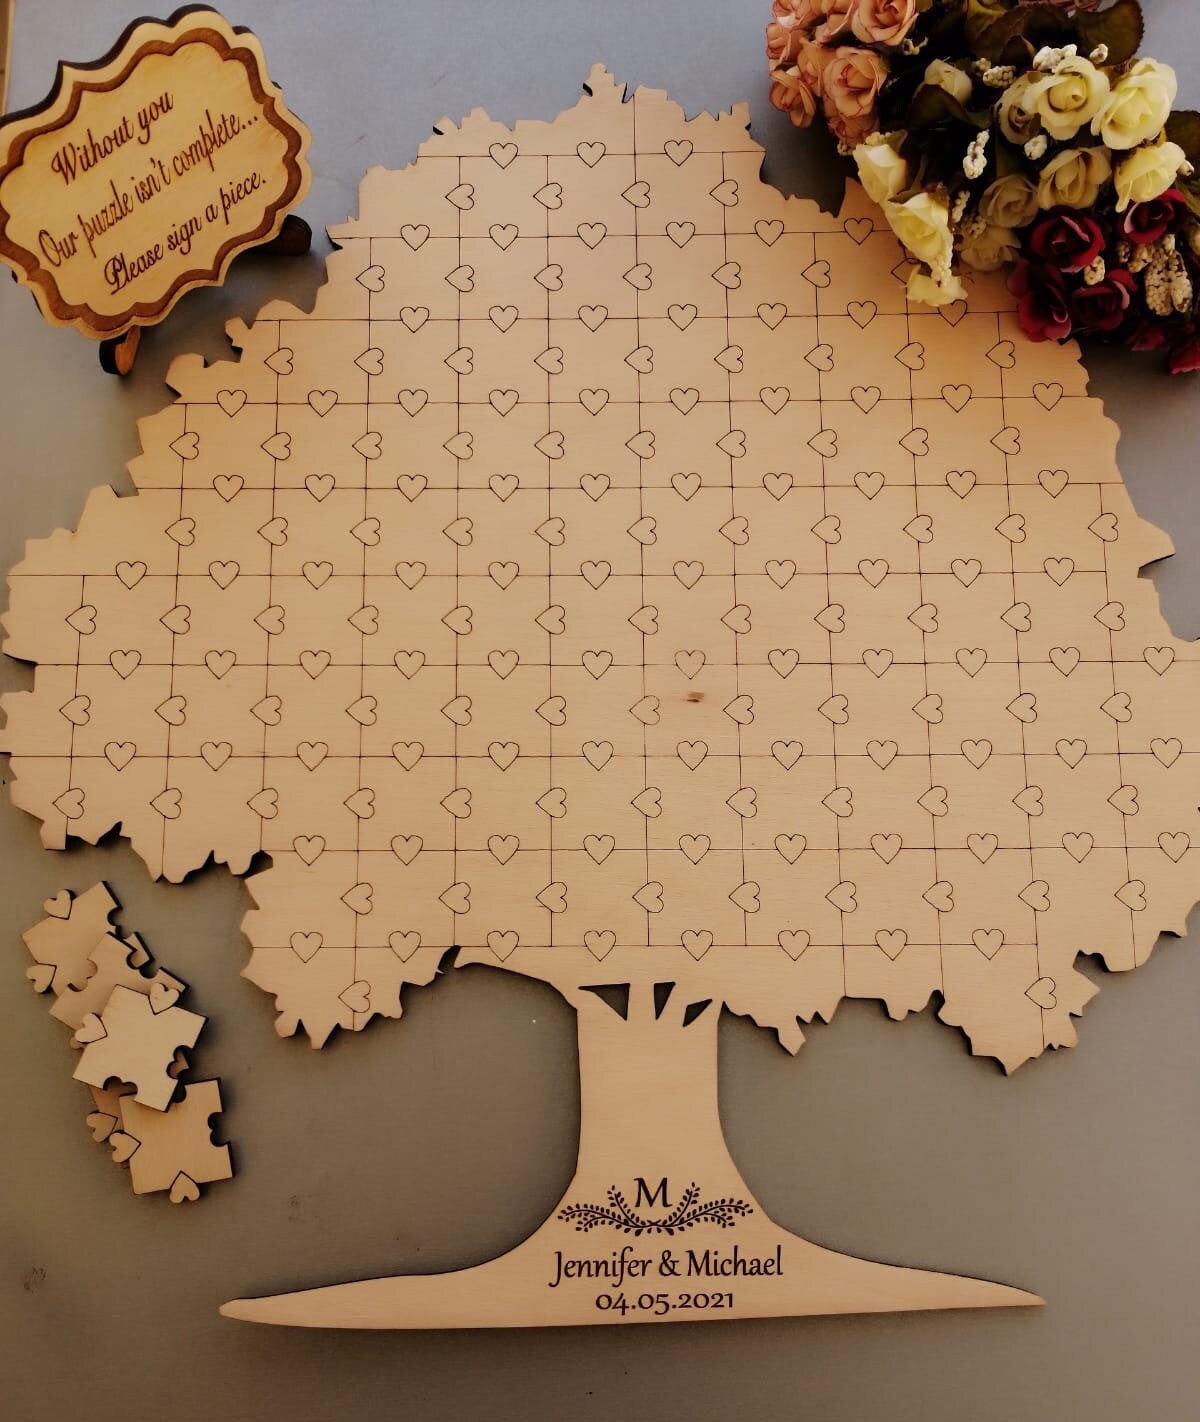 Puzzle Tree Guest Book Custom Wedding Guestbook, Wedding Guest Book, Wedding Guest Book Ideas, Rustic Guestbook Tree Alternative, FREE Sign